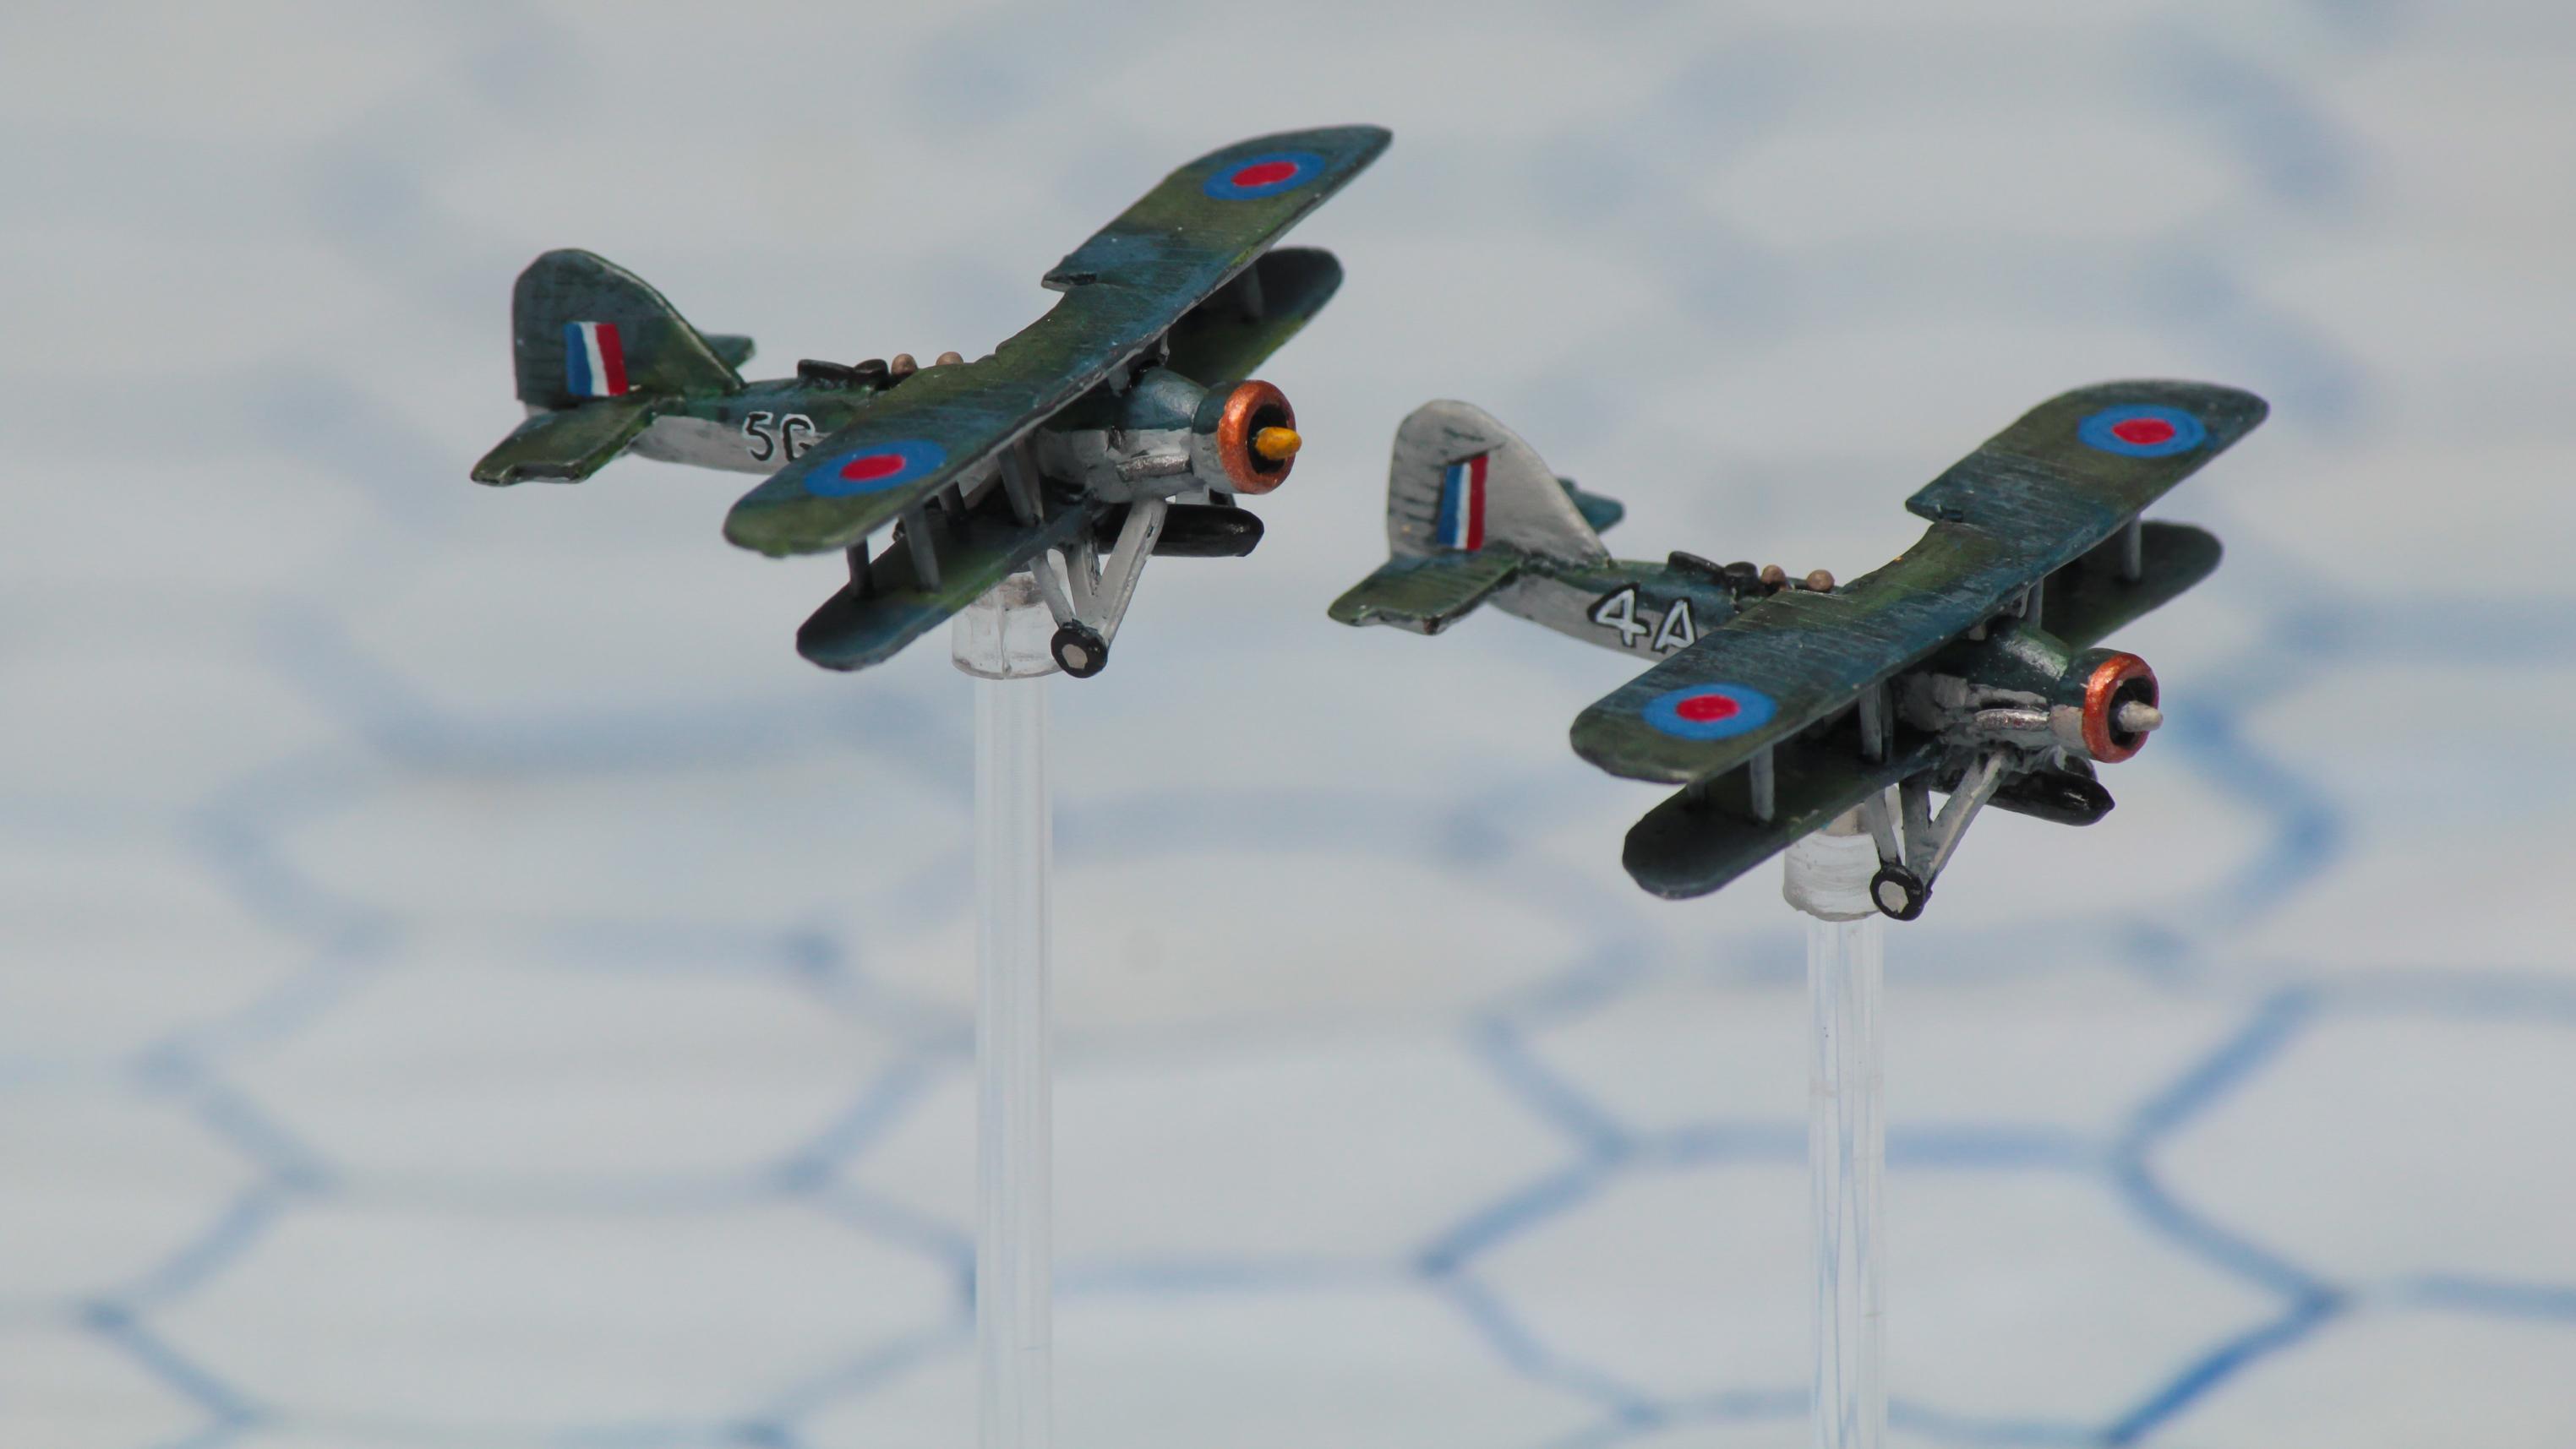 1:300 Scale, 6mm Scale, Air, Air Combat, Aircraft, Aviation, Finland, Fliers, French, Germans, Historical, Imperial Japan, Italian, Luftwaffe, Planes, Raf, Republic Of China, Soviet, Usaaf, World War 2